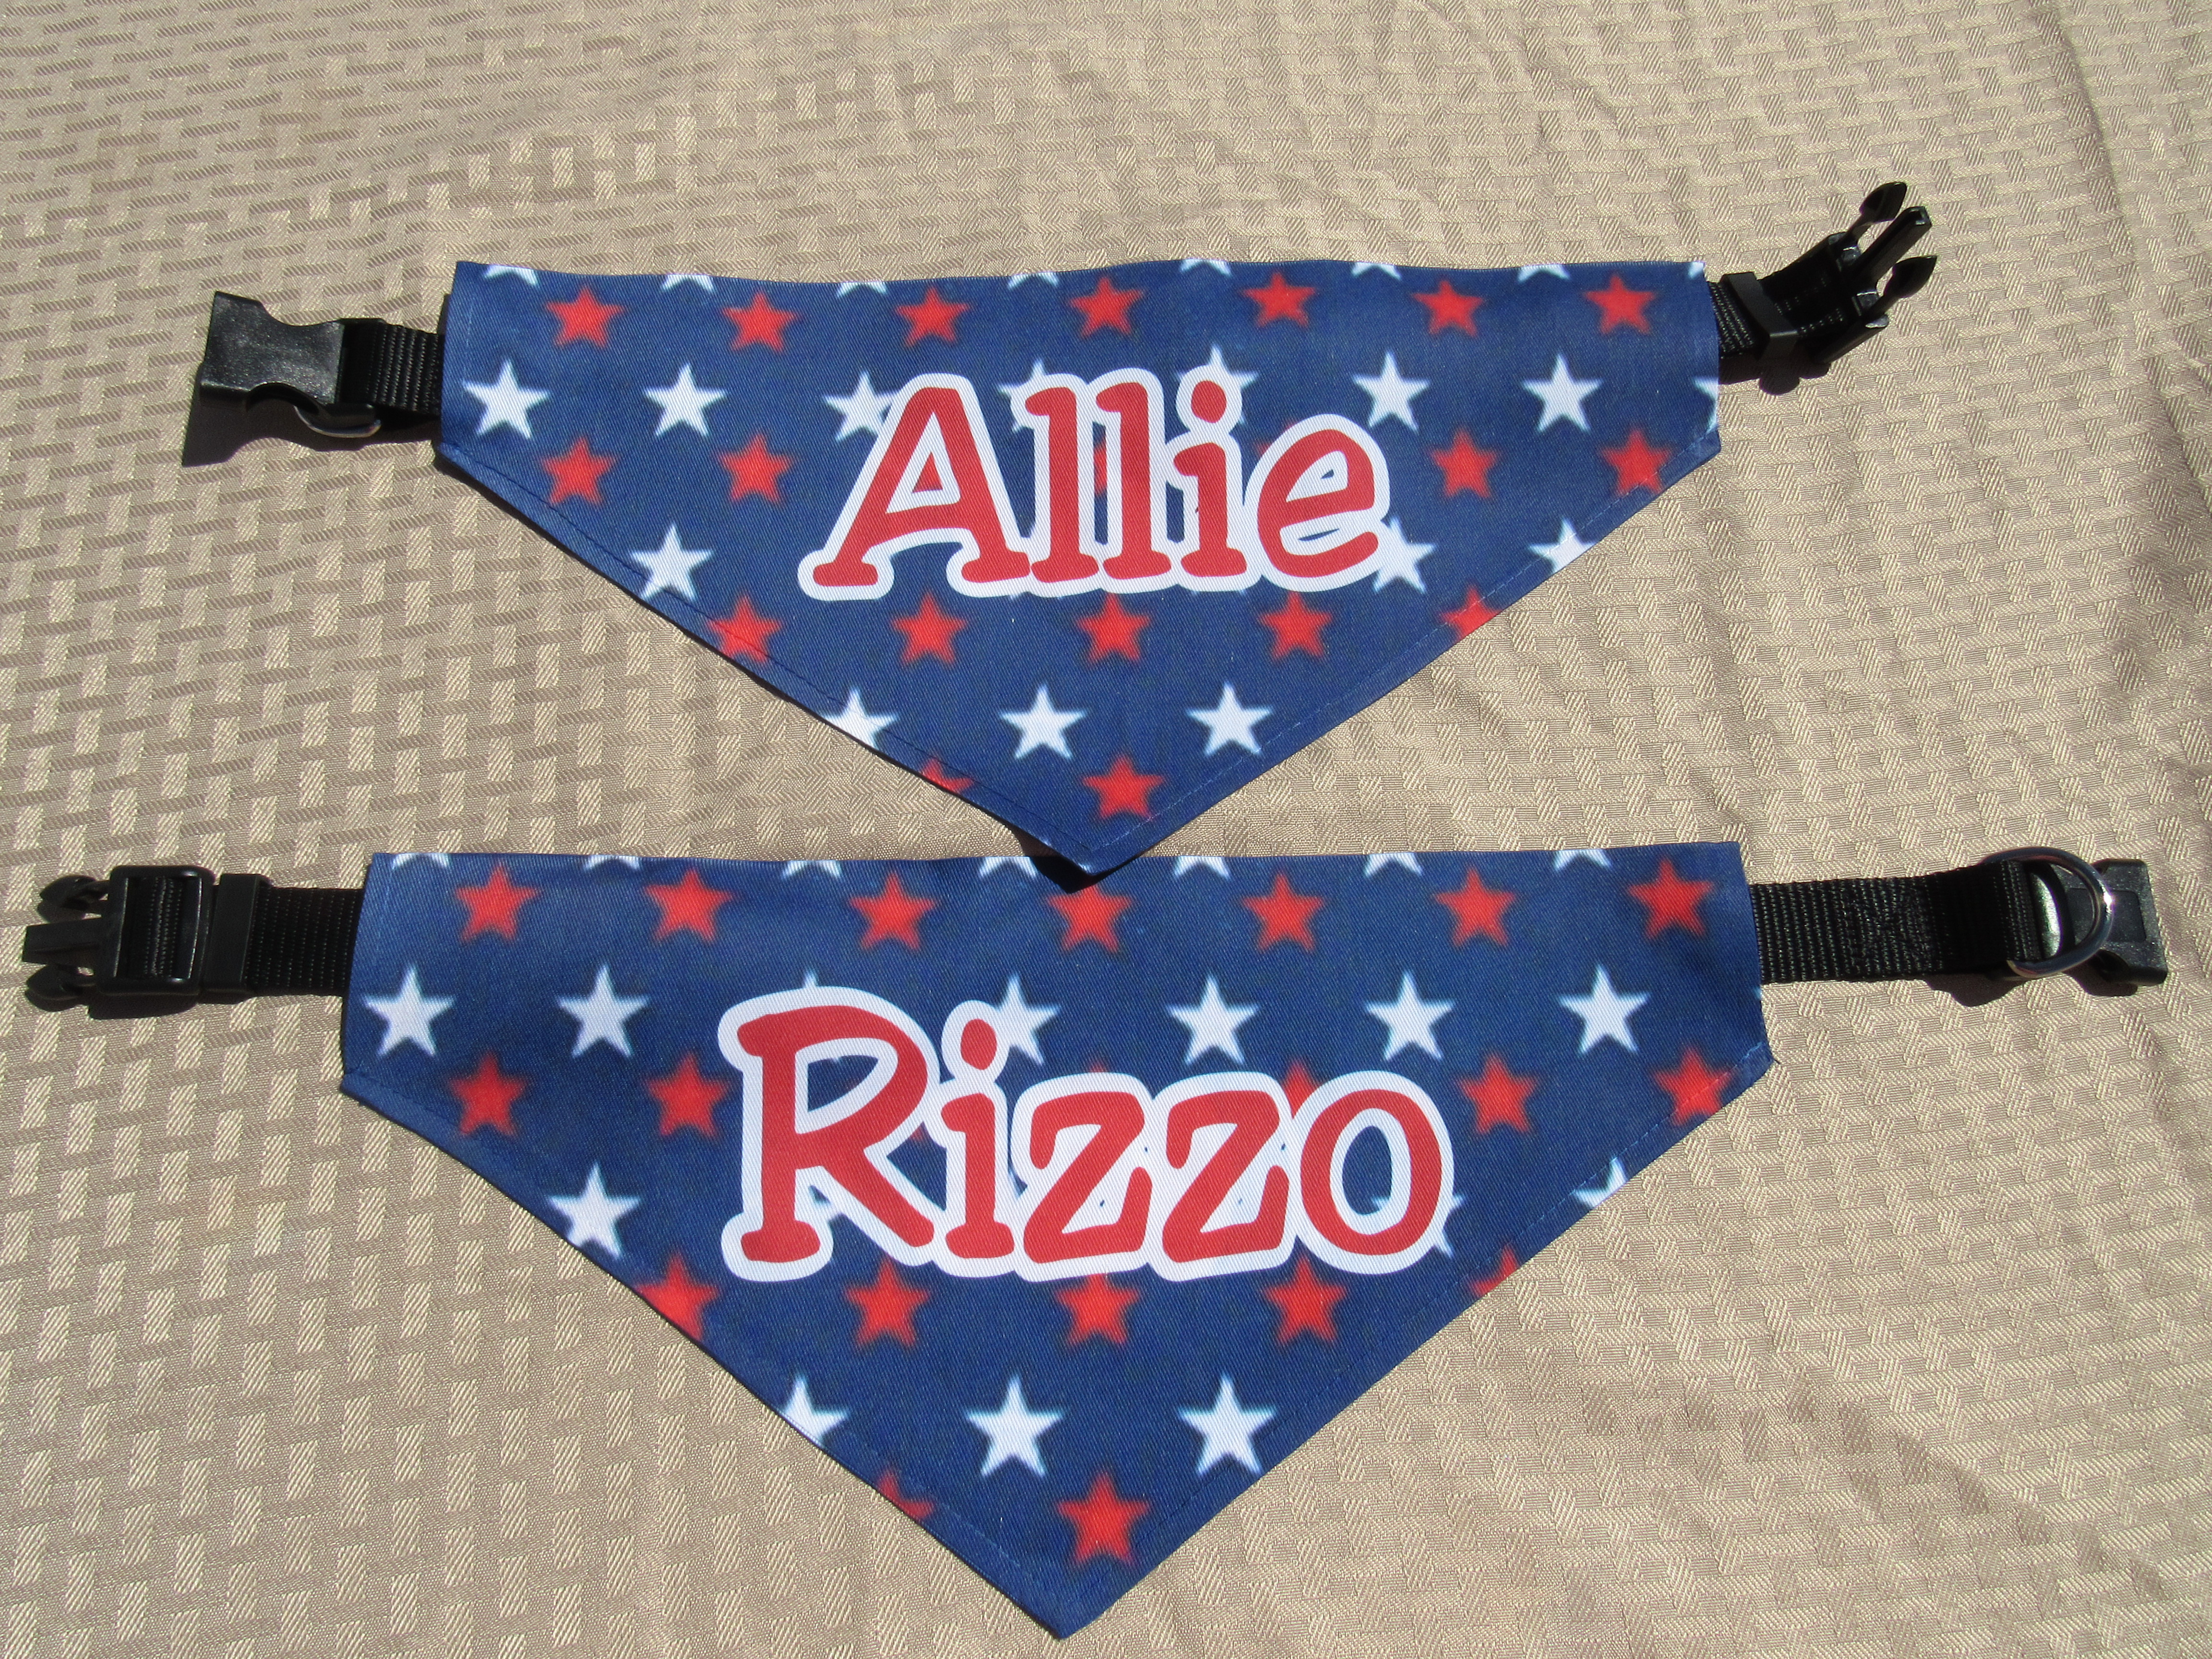 Allie & Rizzo made with sublimation printing